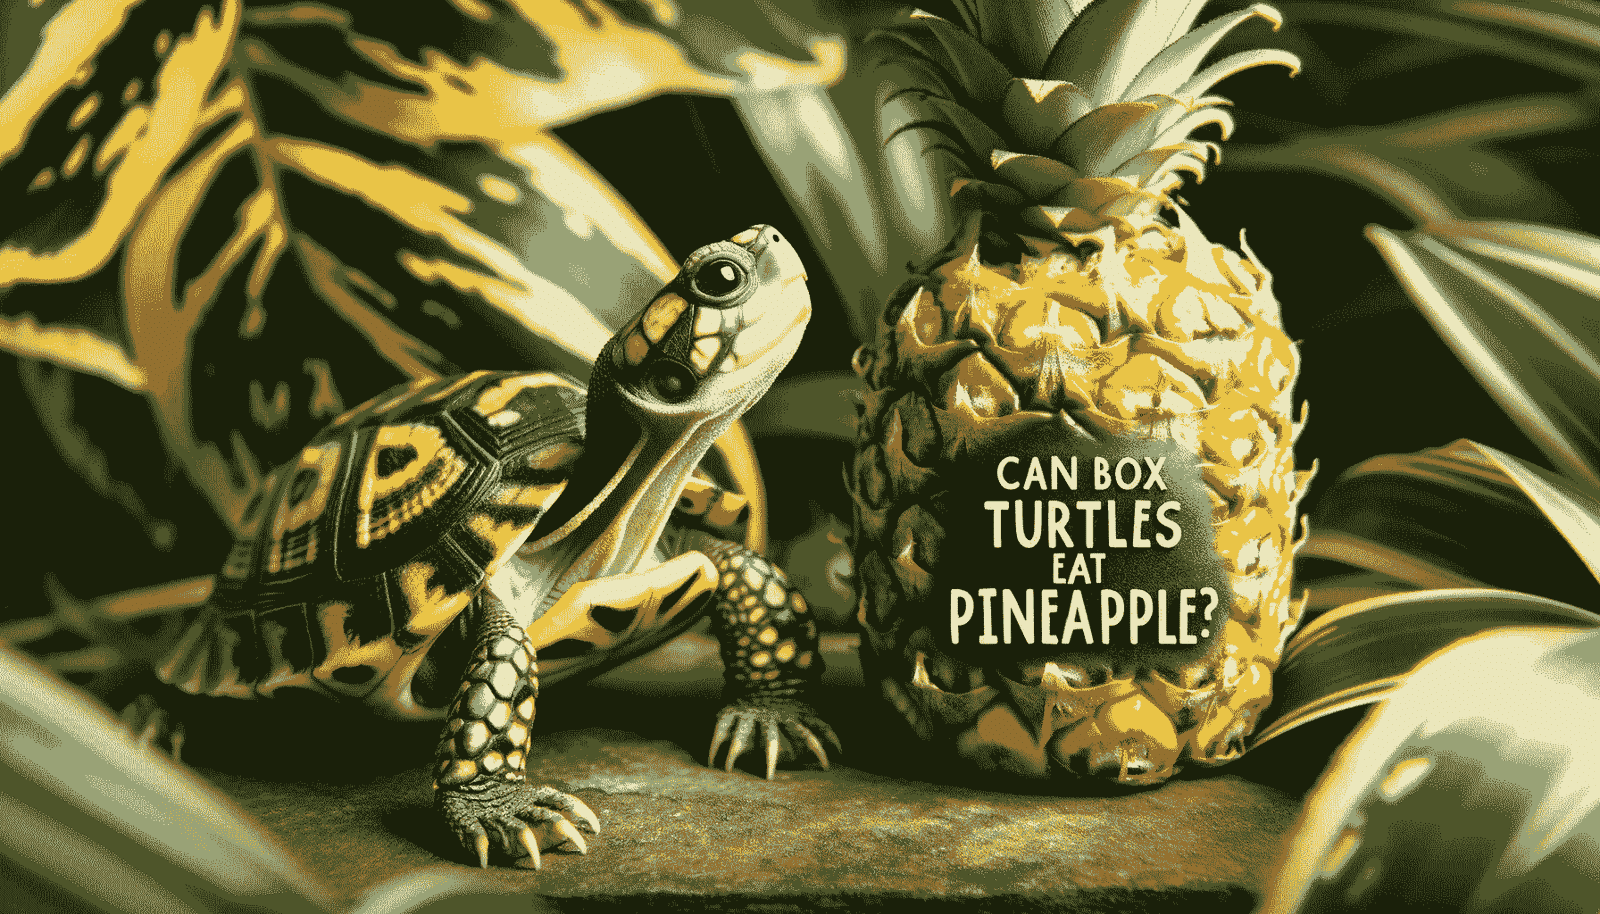 Can Box Turtles Eat Pineapple